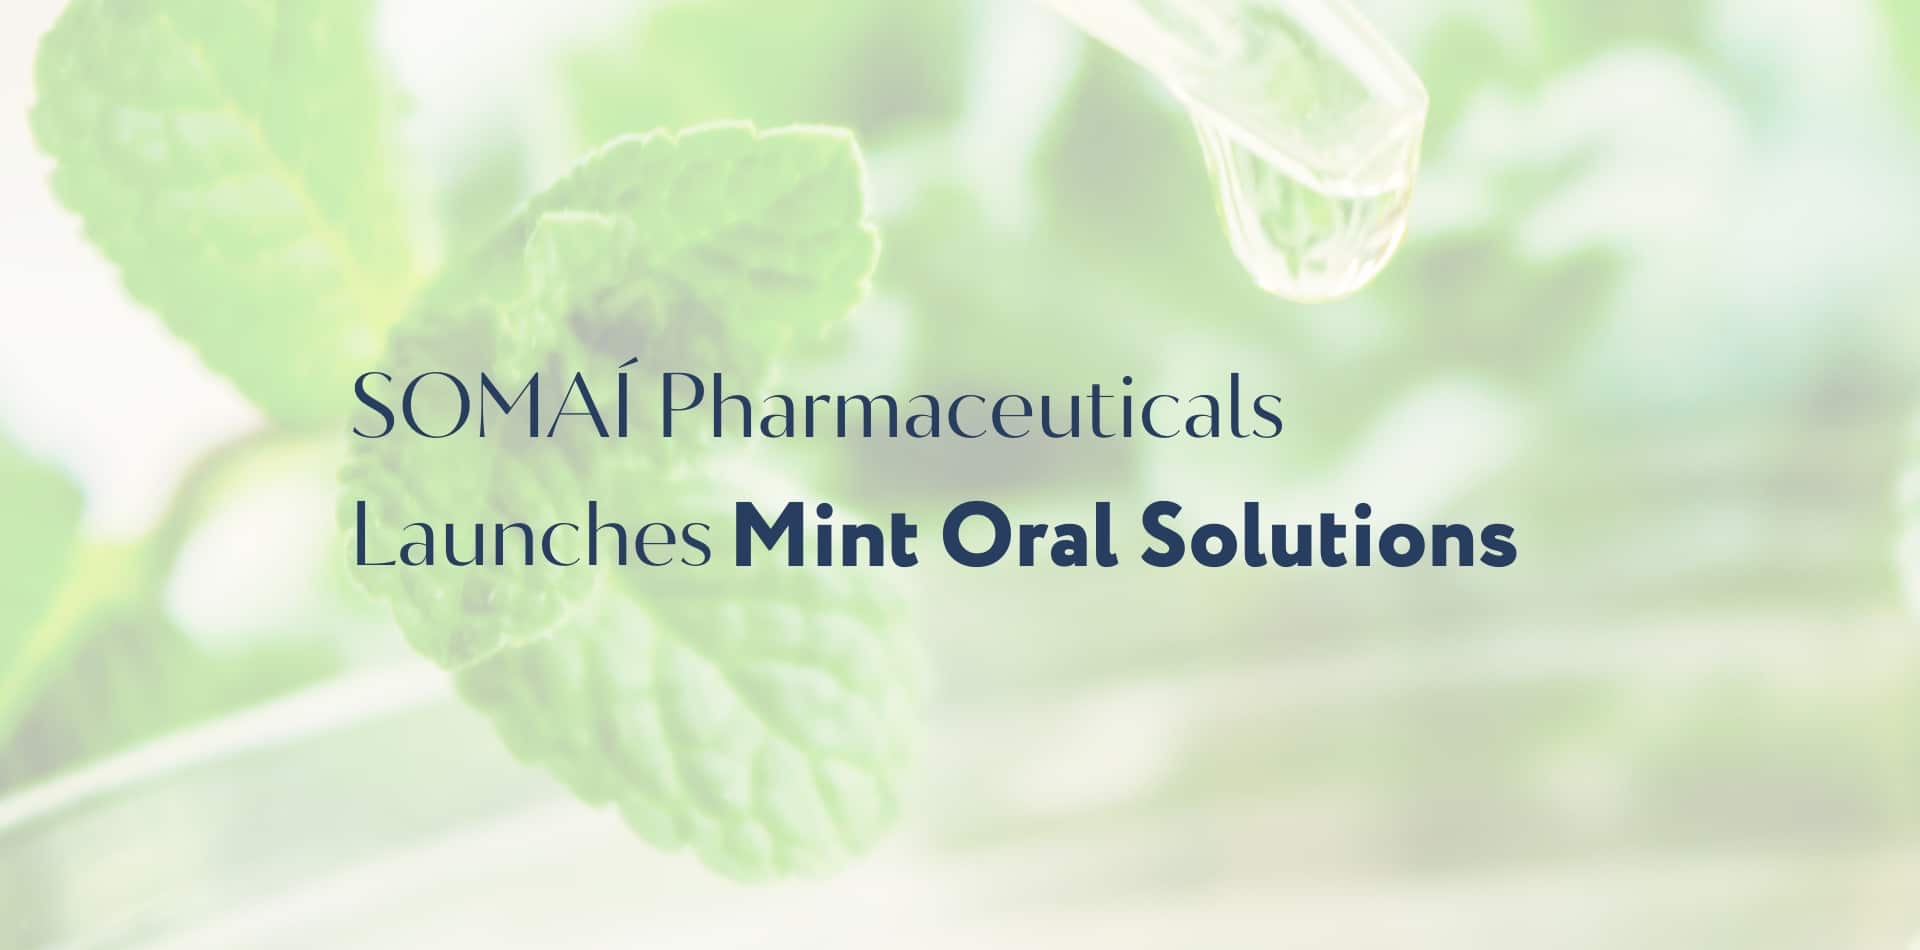 SOMAÍ Pharmaceuticals Expands Its Most Comprehensive Medicinal Cannabis Portfolio With Launch of New Mint Oral Solutions Line